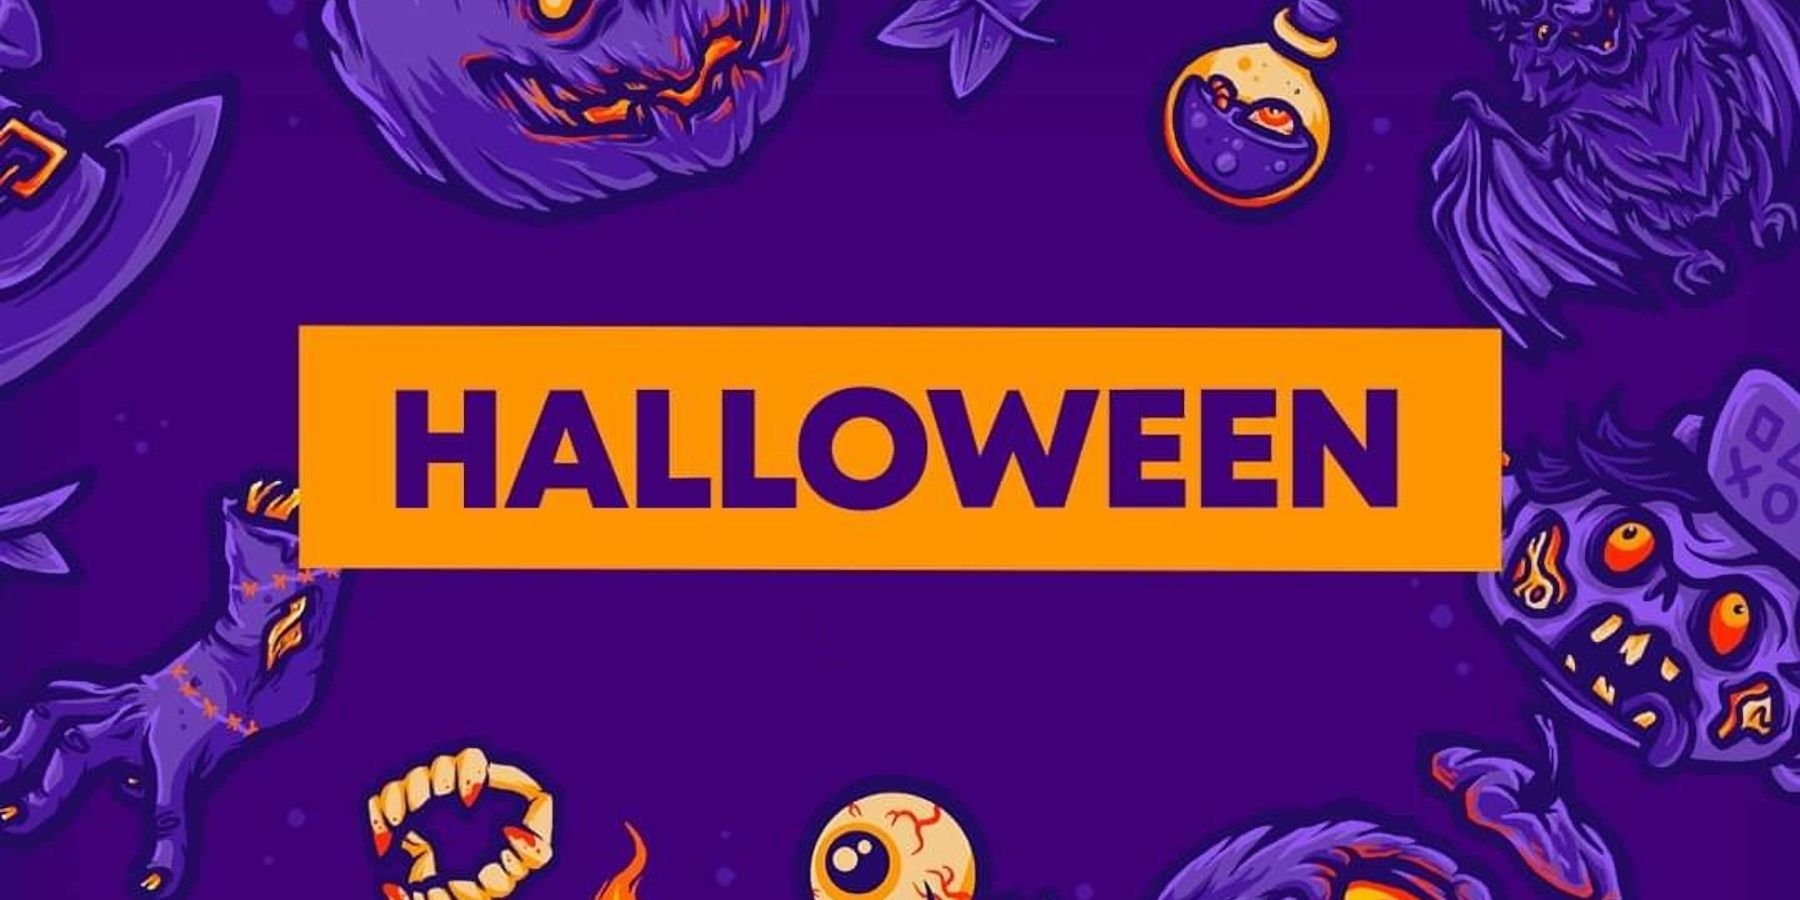 PlayStation Launches Halloween Sale on PS4 and PS5